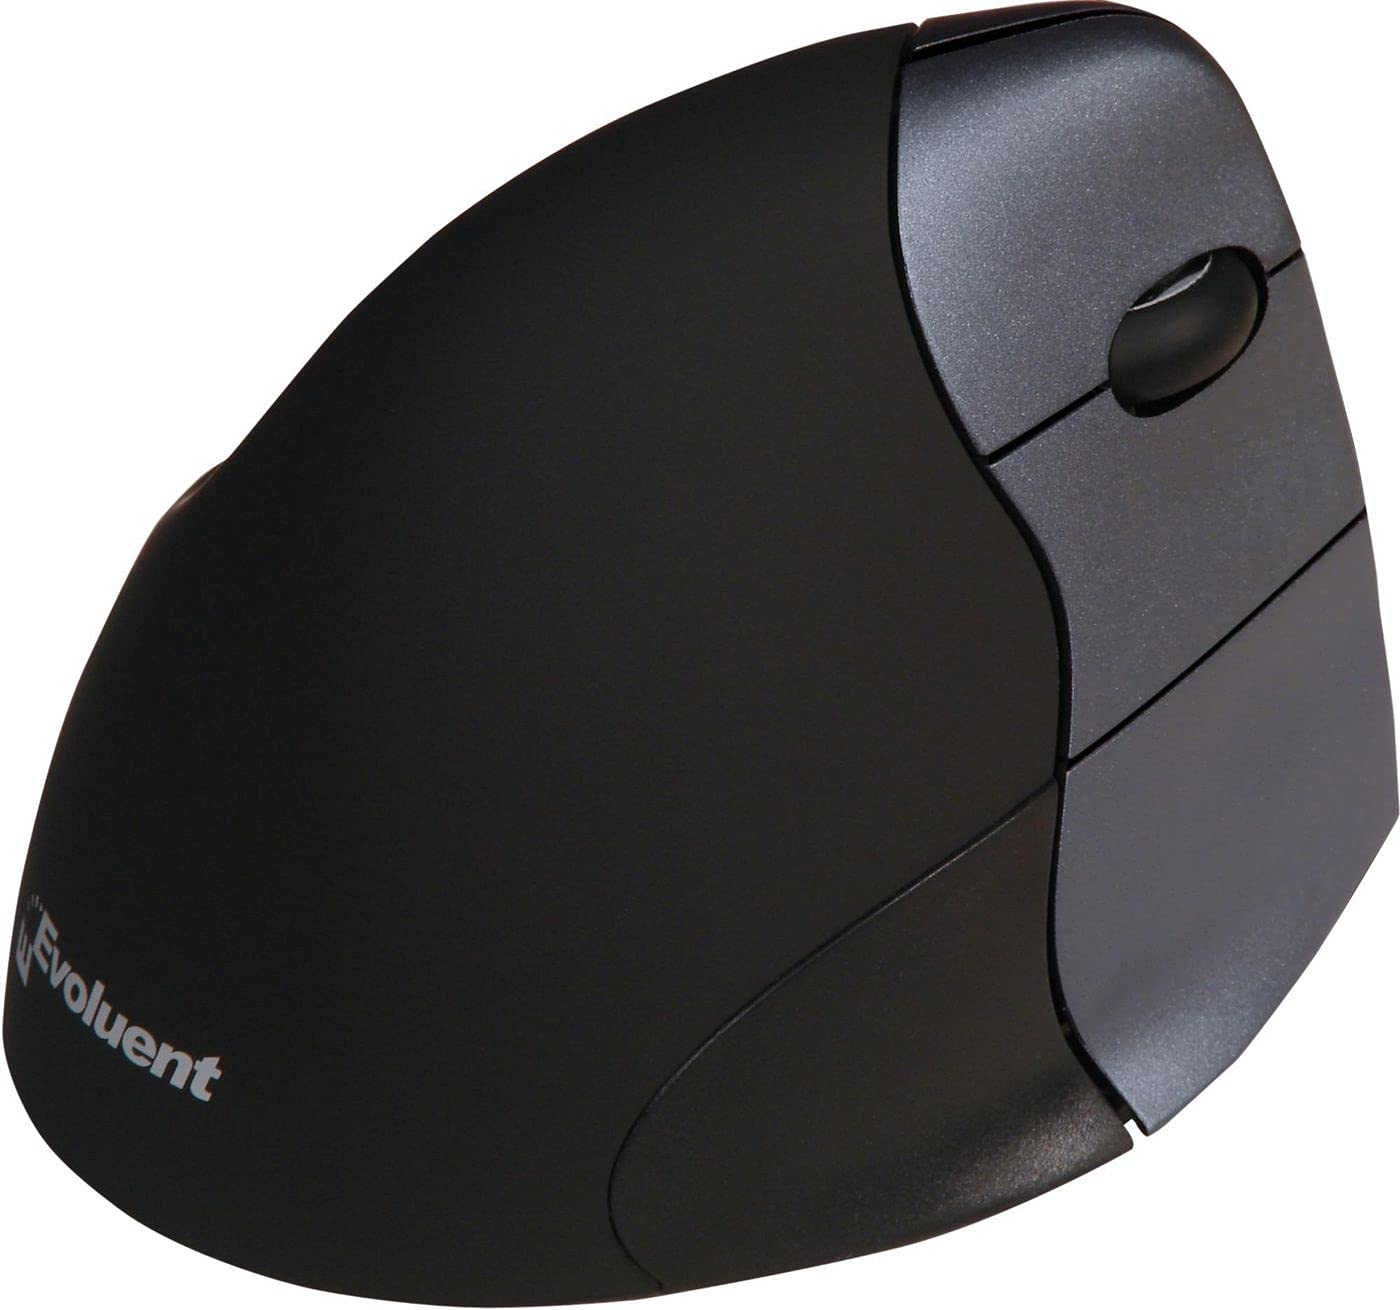 Evoluent Vertical Mouse4 WL Right Hand